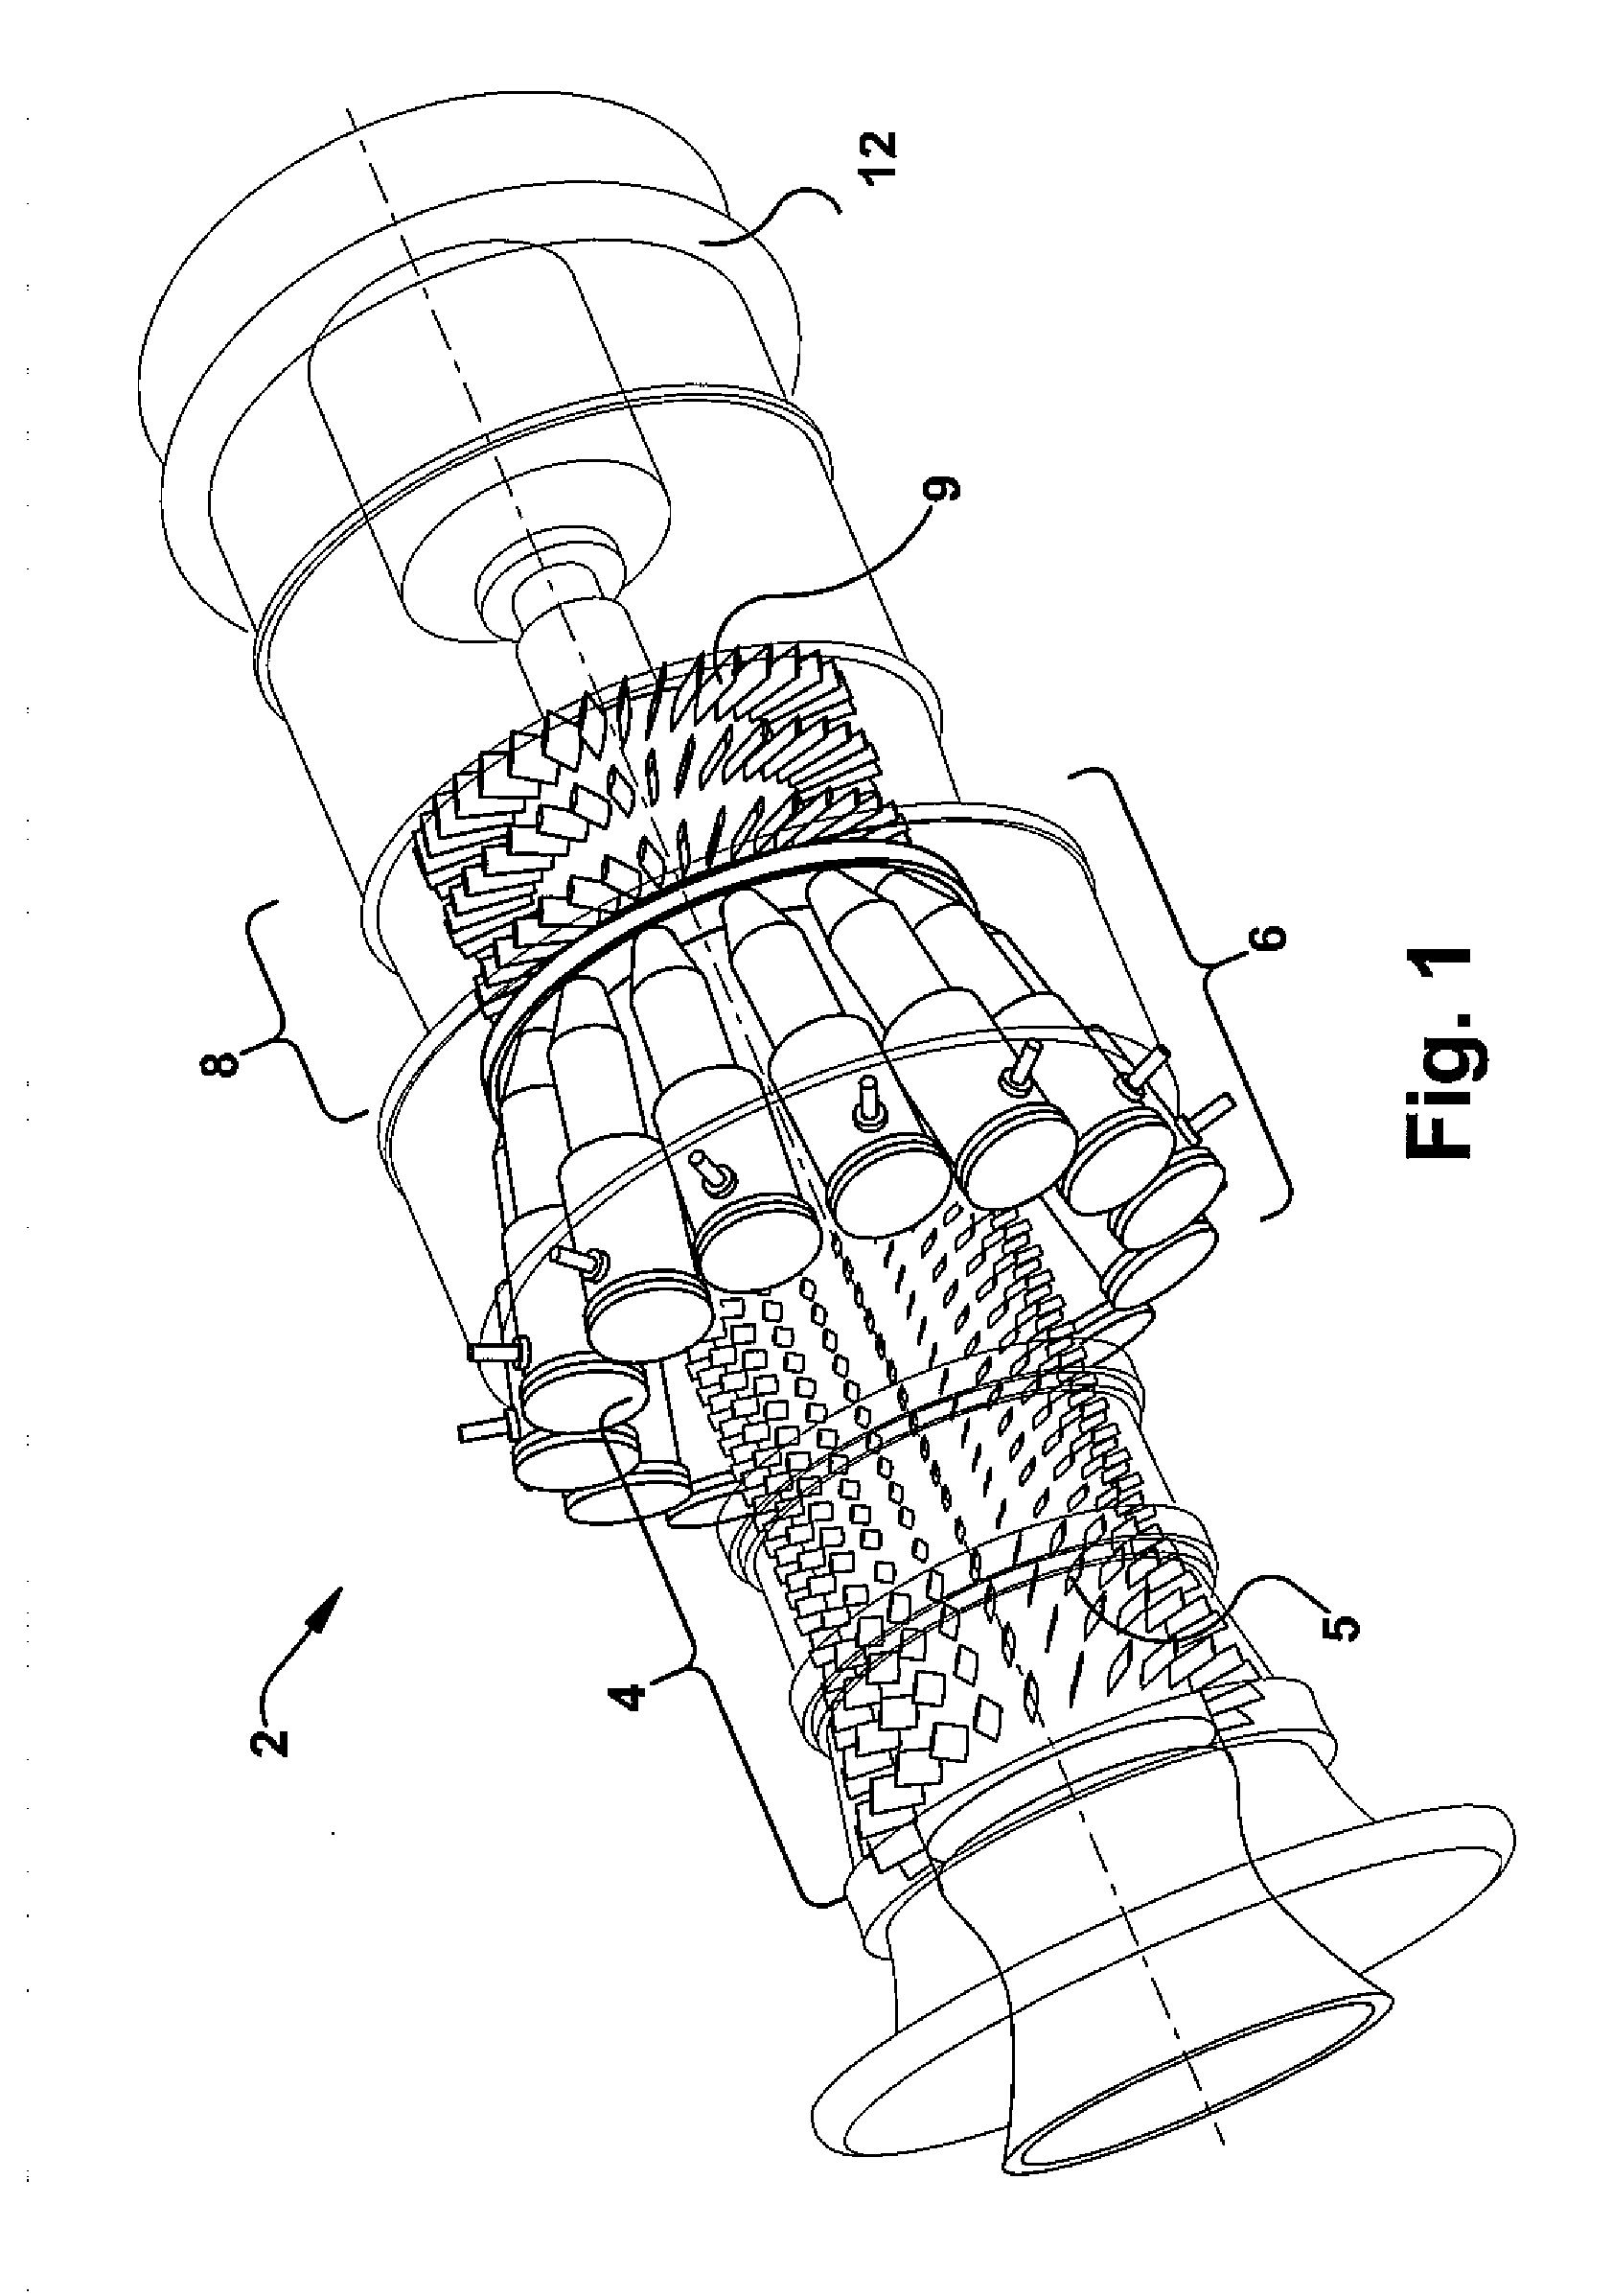 Method and systems for operating turbine engines